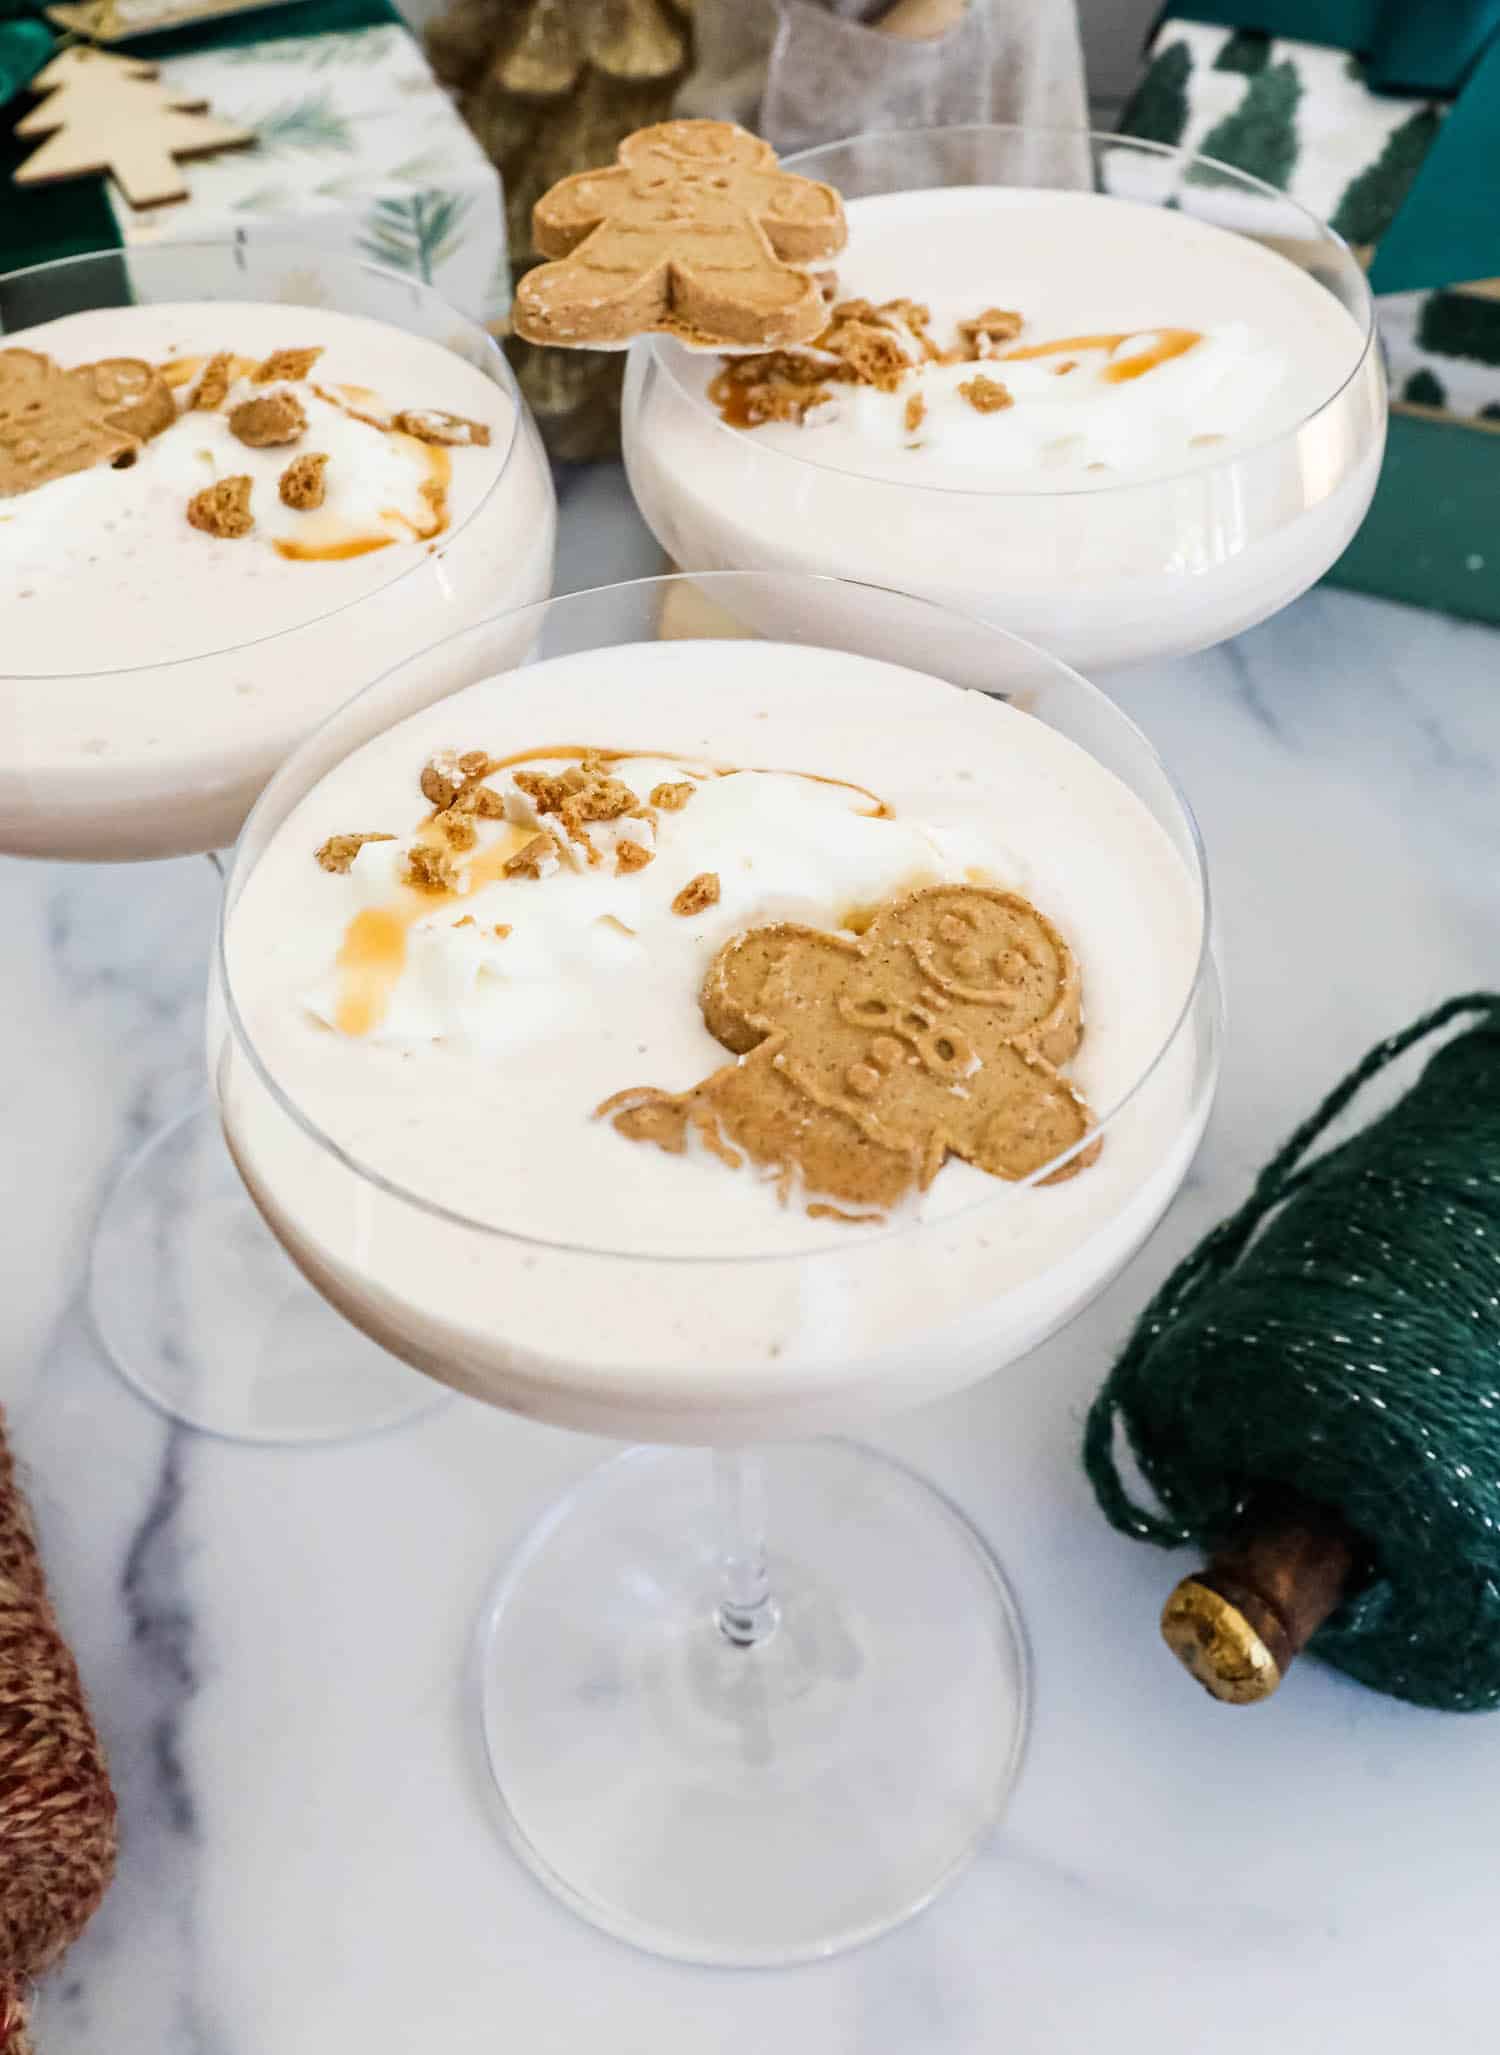 Gingerbread martini garnished with whipped cream and gingerbread cookies.